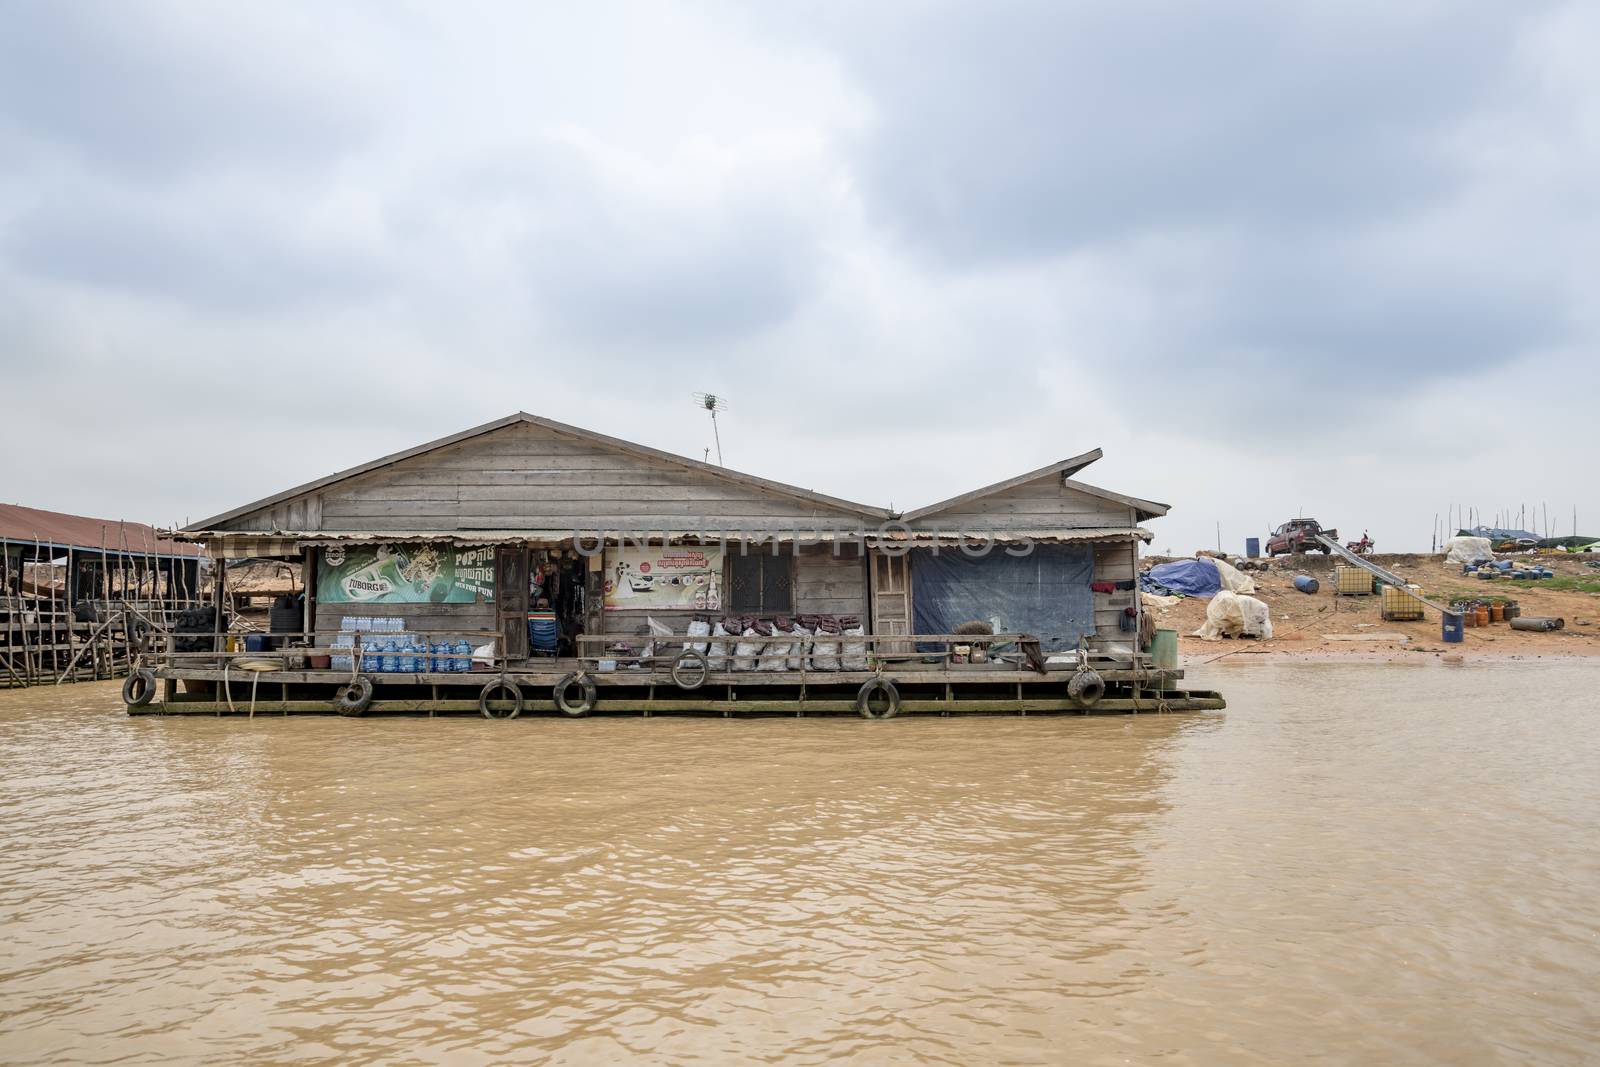 Building (home or grocery?) floating on Siem Reap river going to Tonle Sap lake, a famous tourist destination of Siem Reap Province, Cambodia